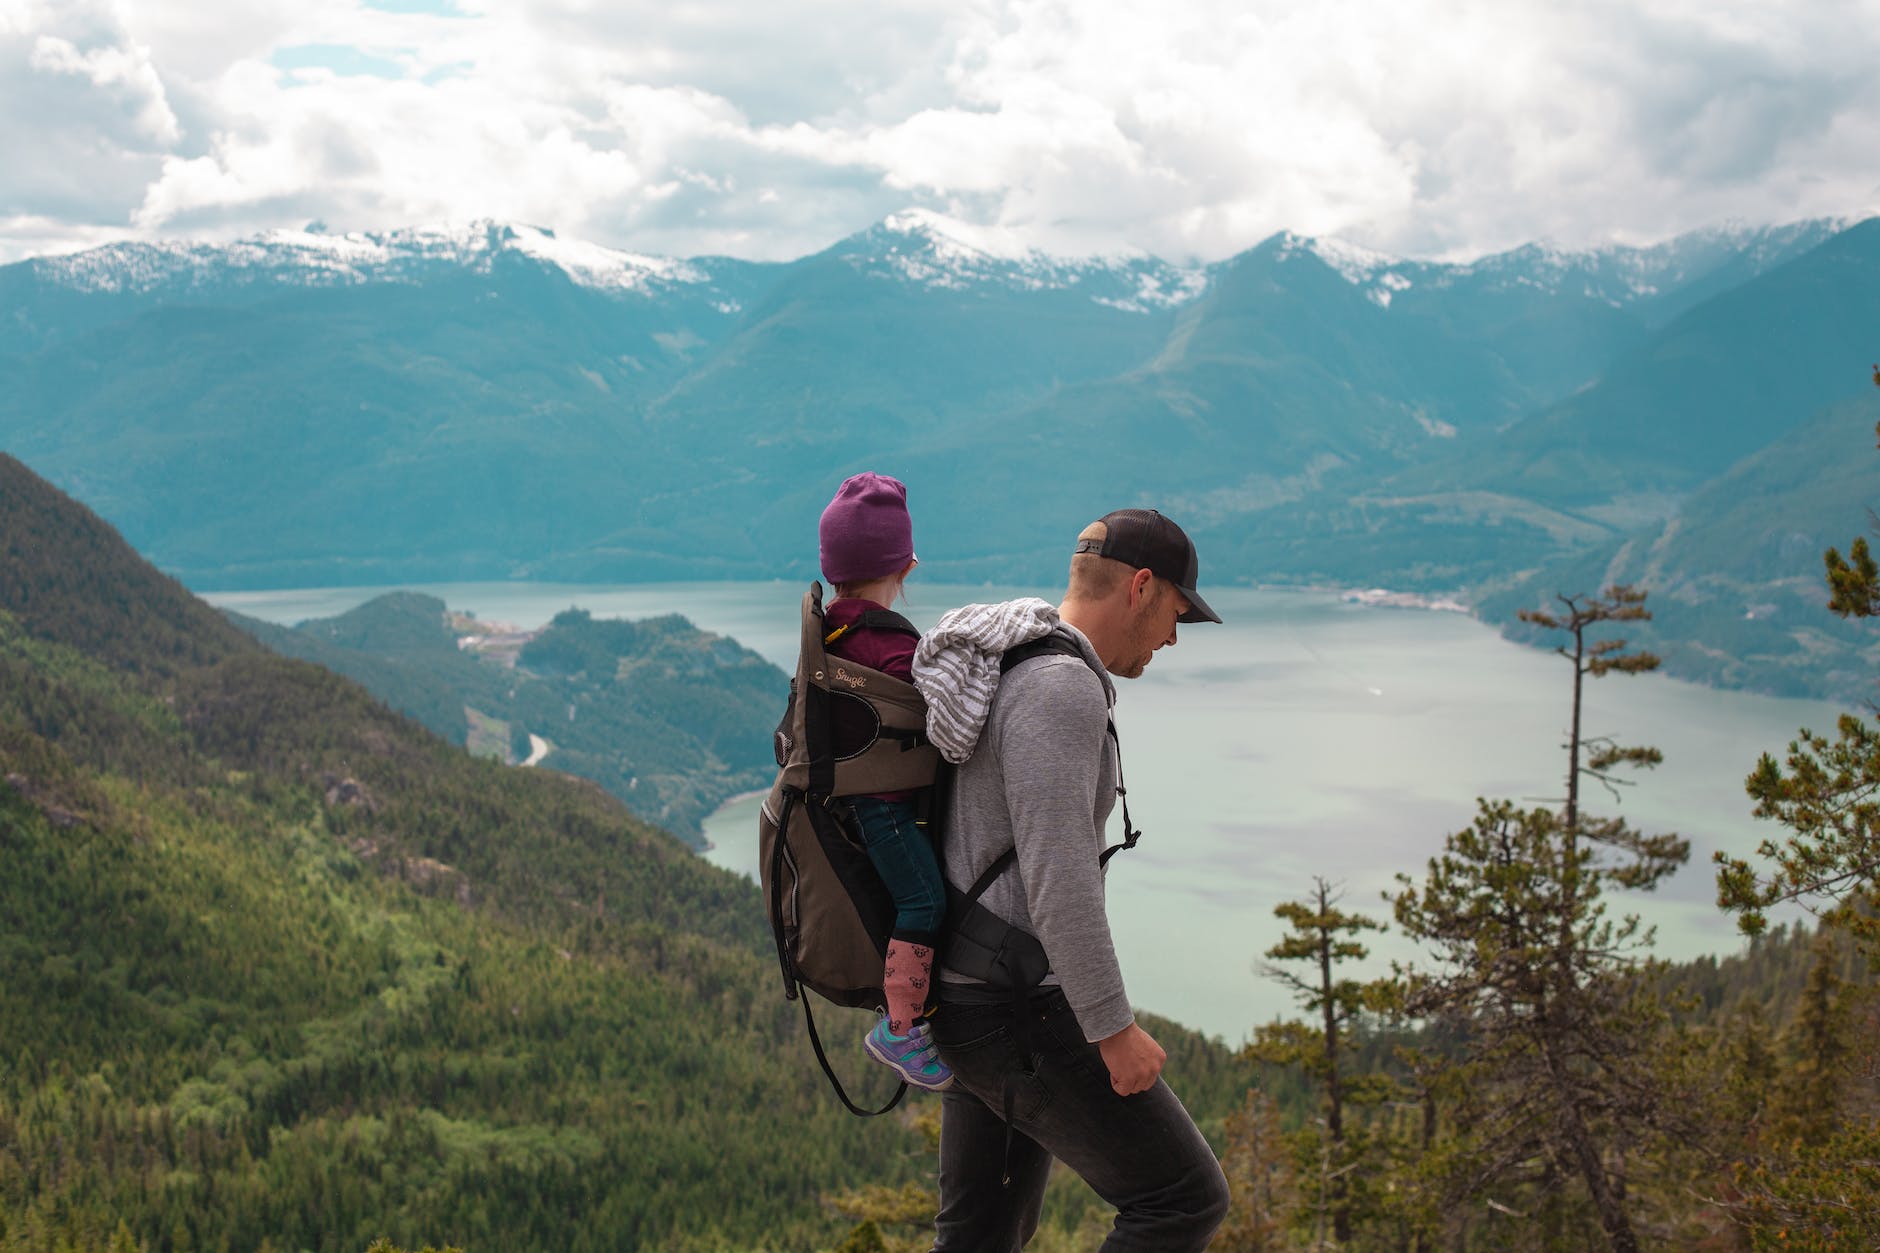 father and child hiking in a mountain landscape